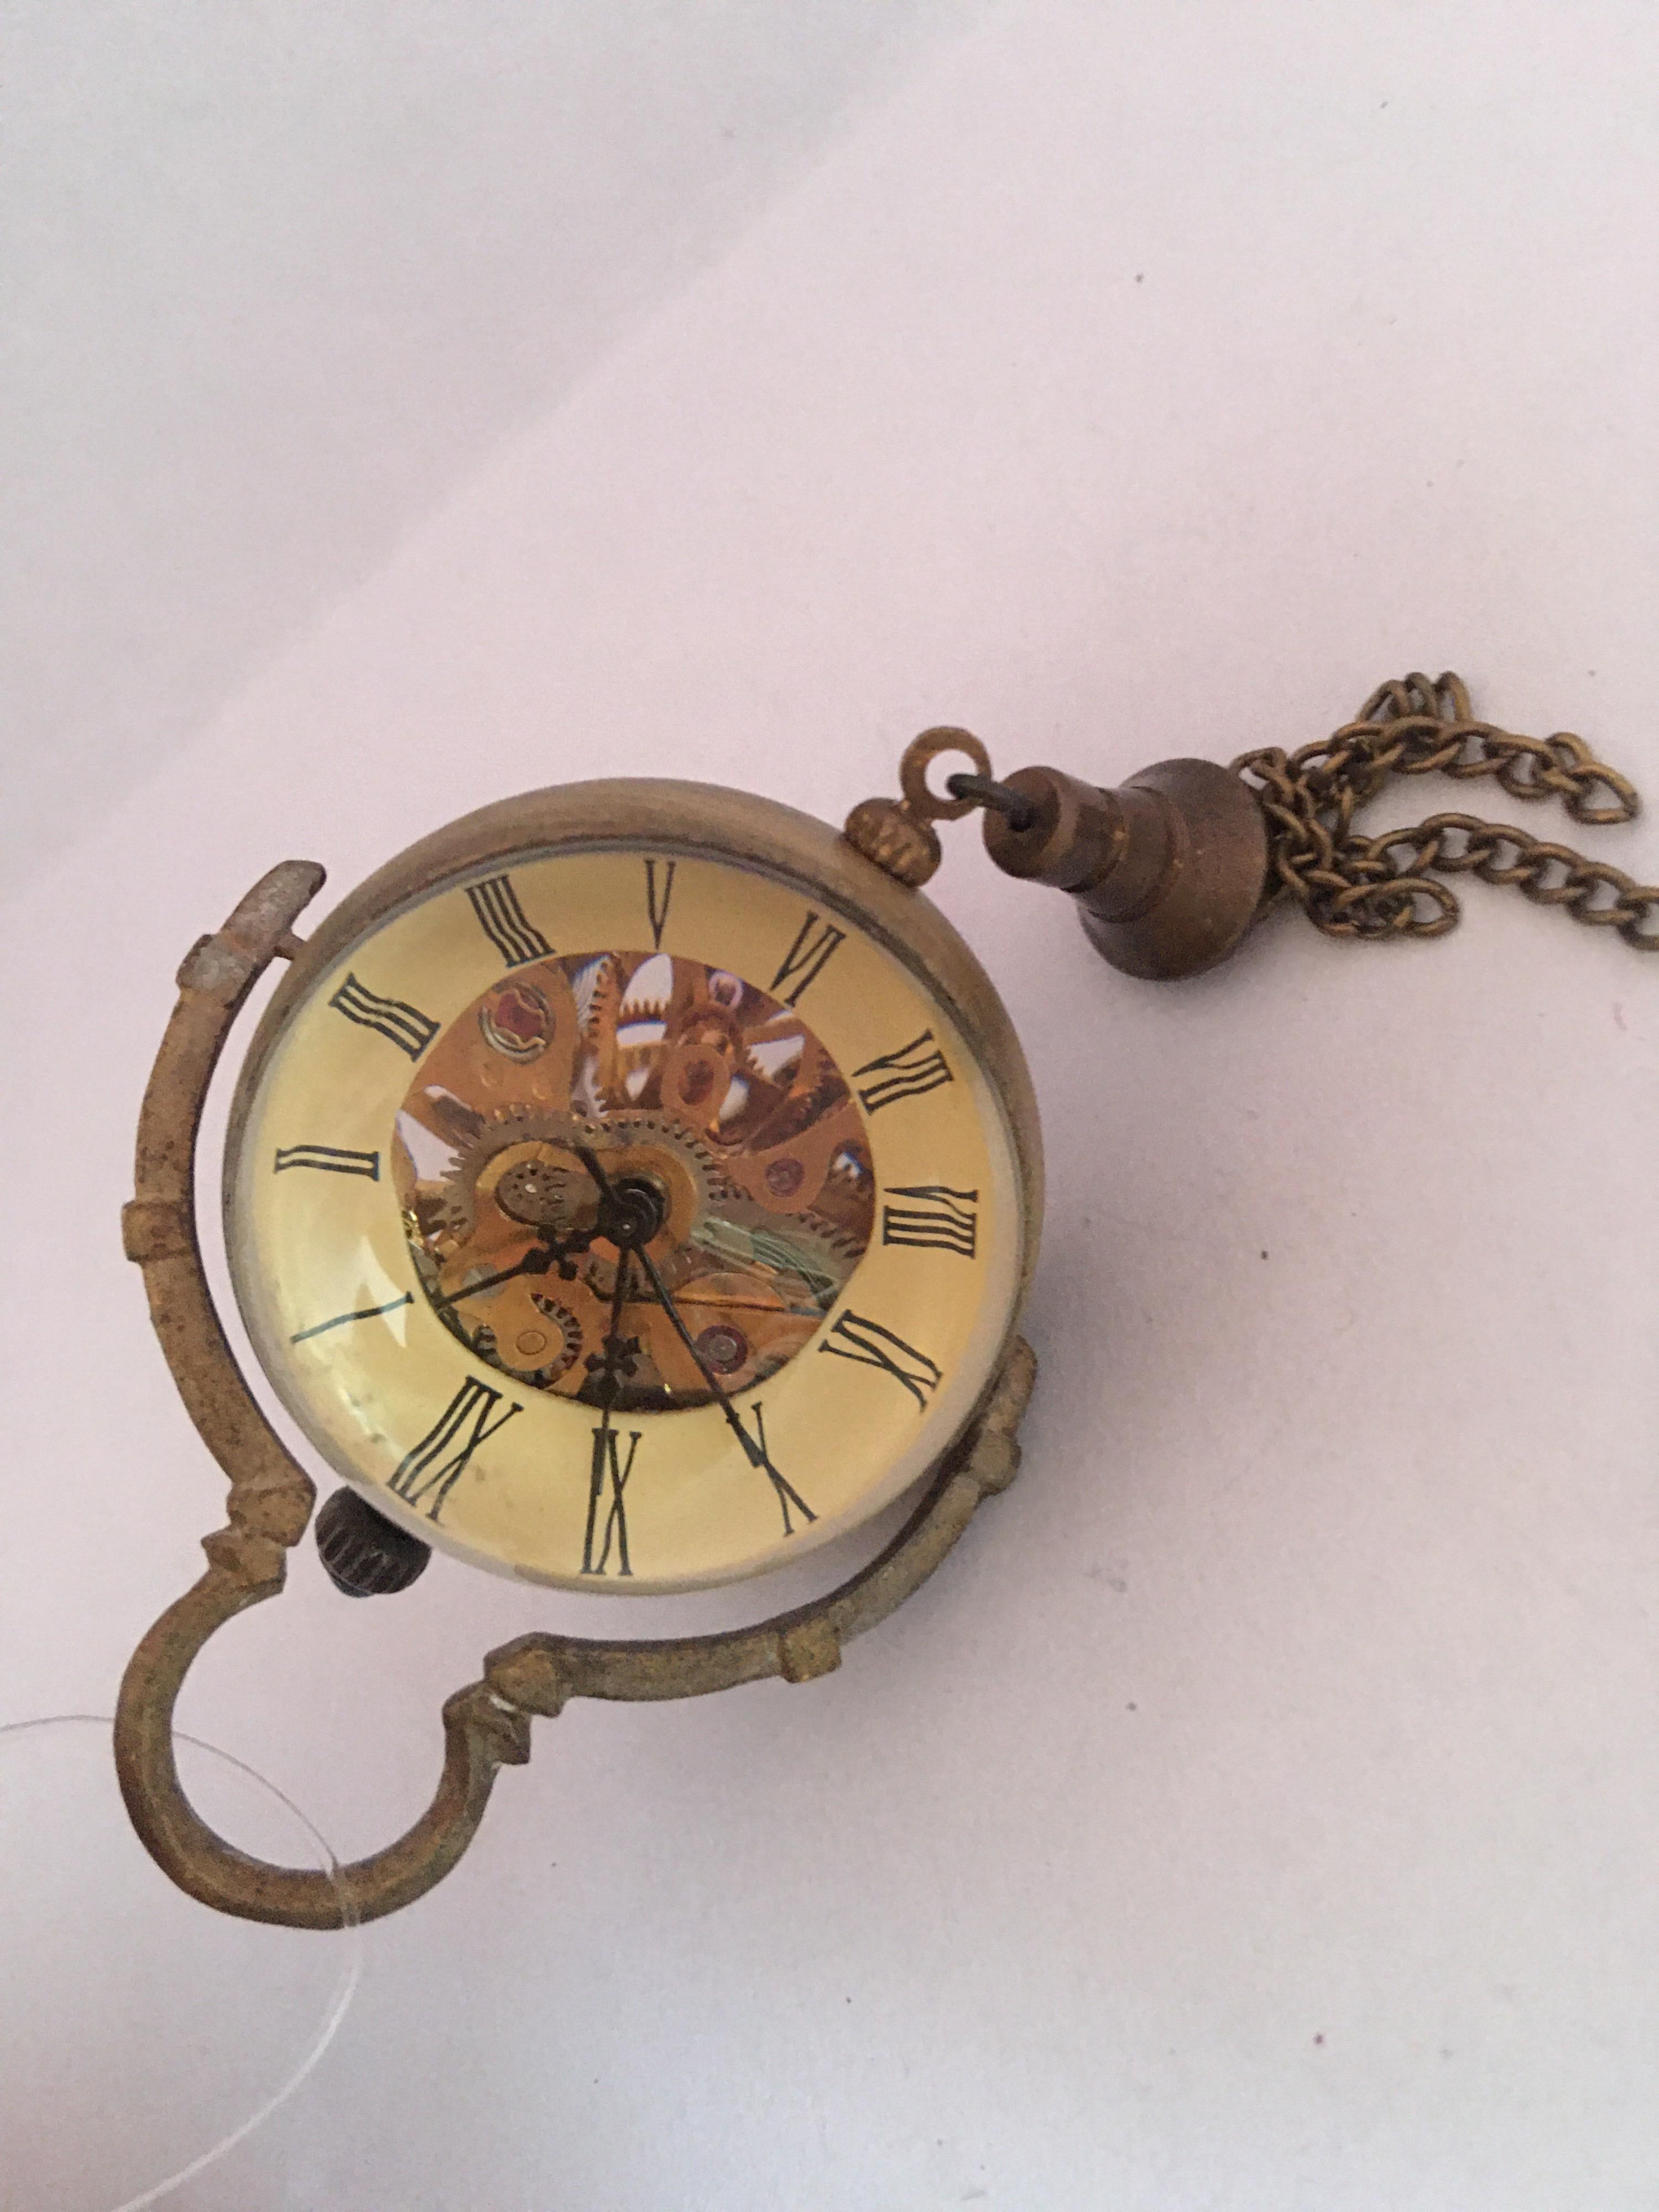 Vintage Mechanical Visible Escapement or Skeleton Pendant Ball Watch For Sale 2